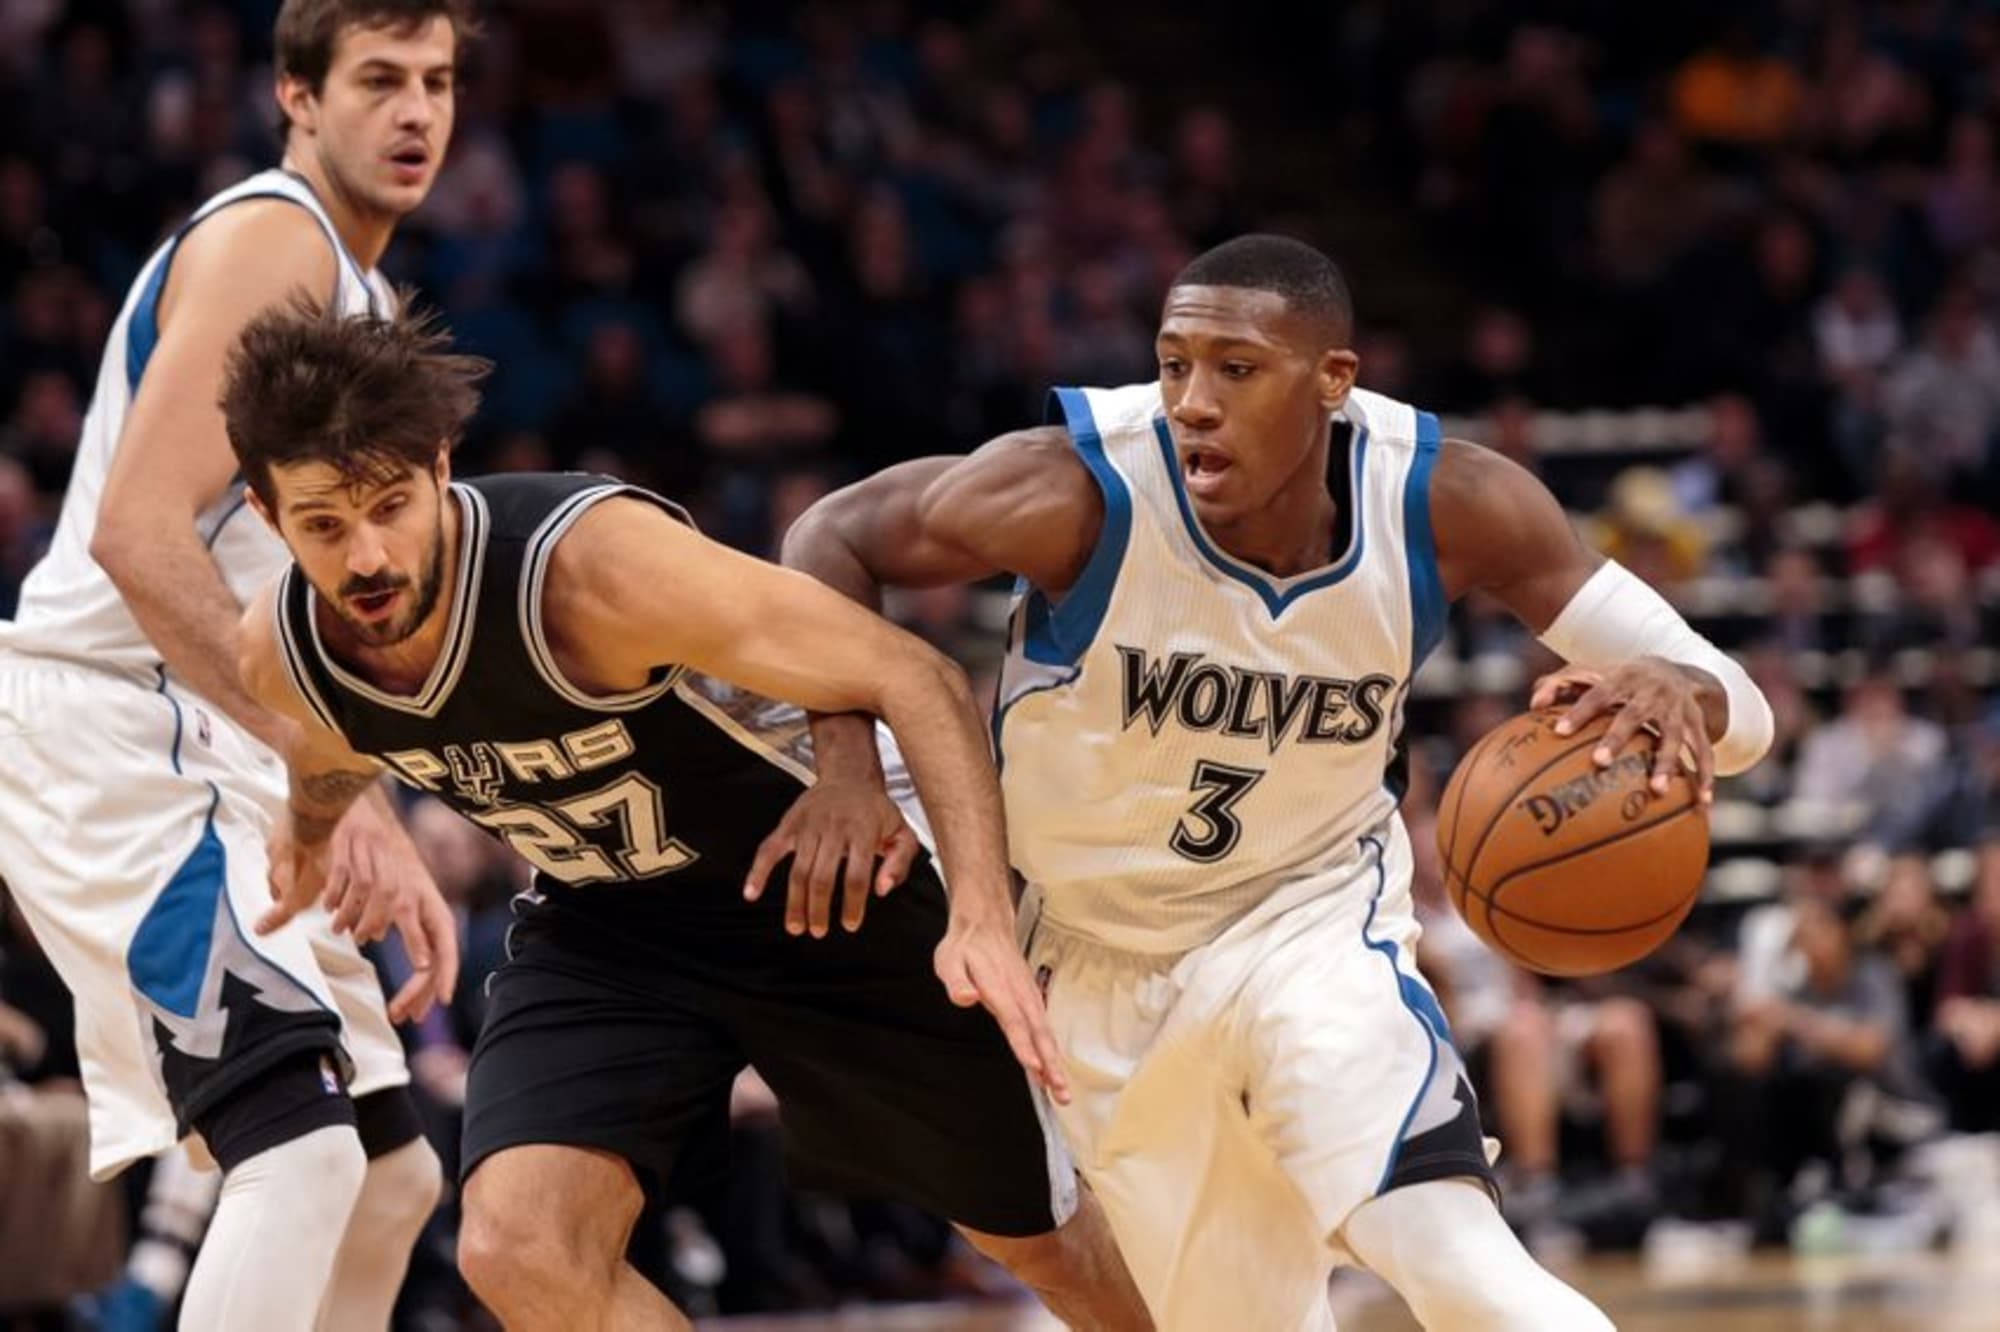 Once again, Timberwolves lose despite Kris Dunn's solid play